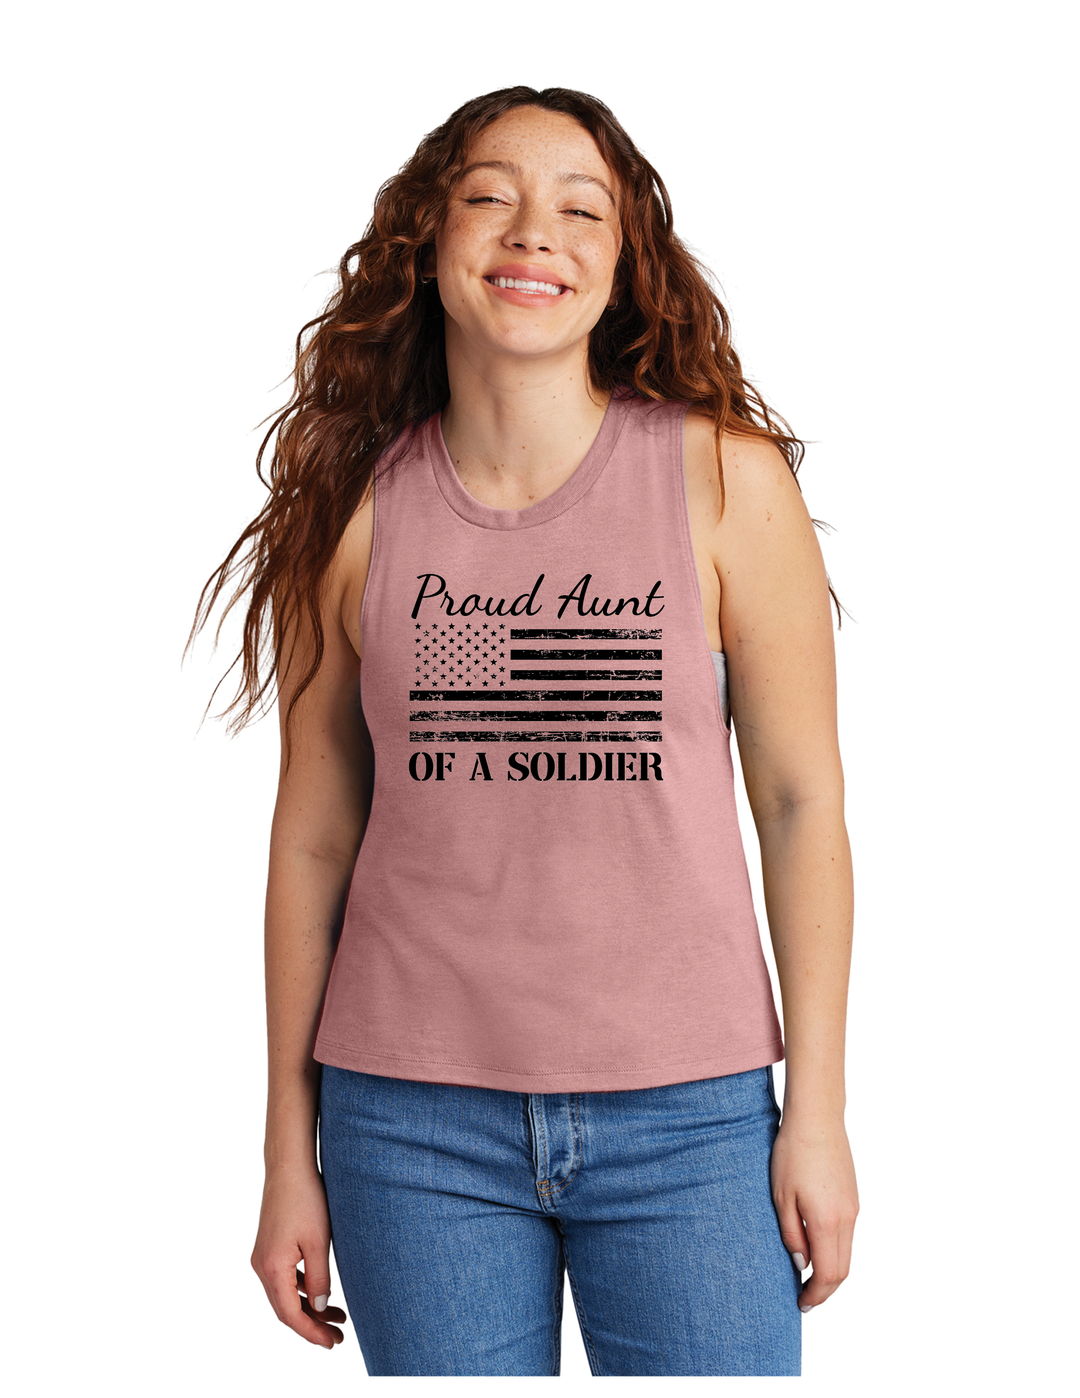 Proud Aunt of a Soldier Muscle Tank (Pink)